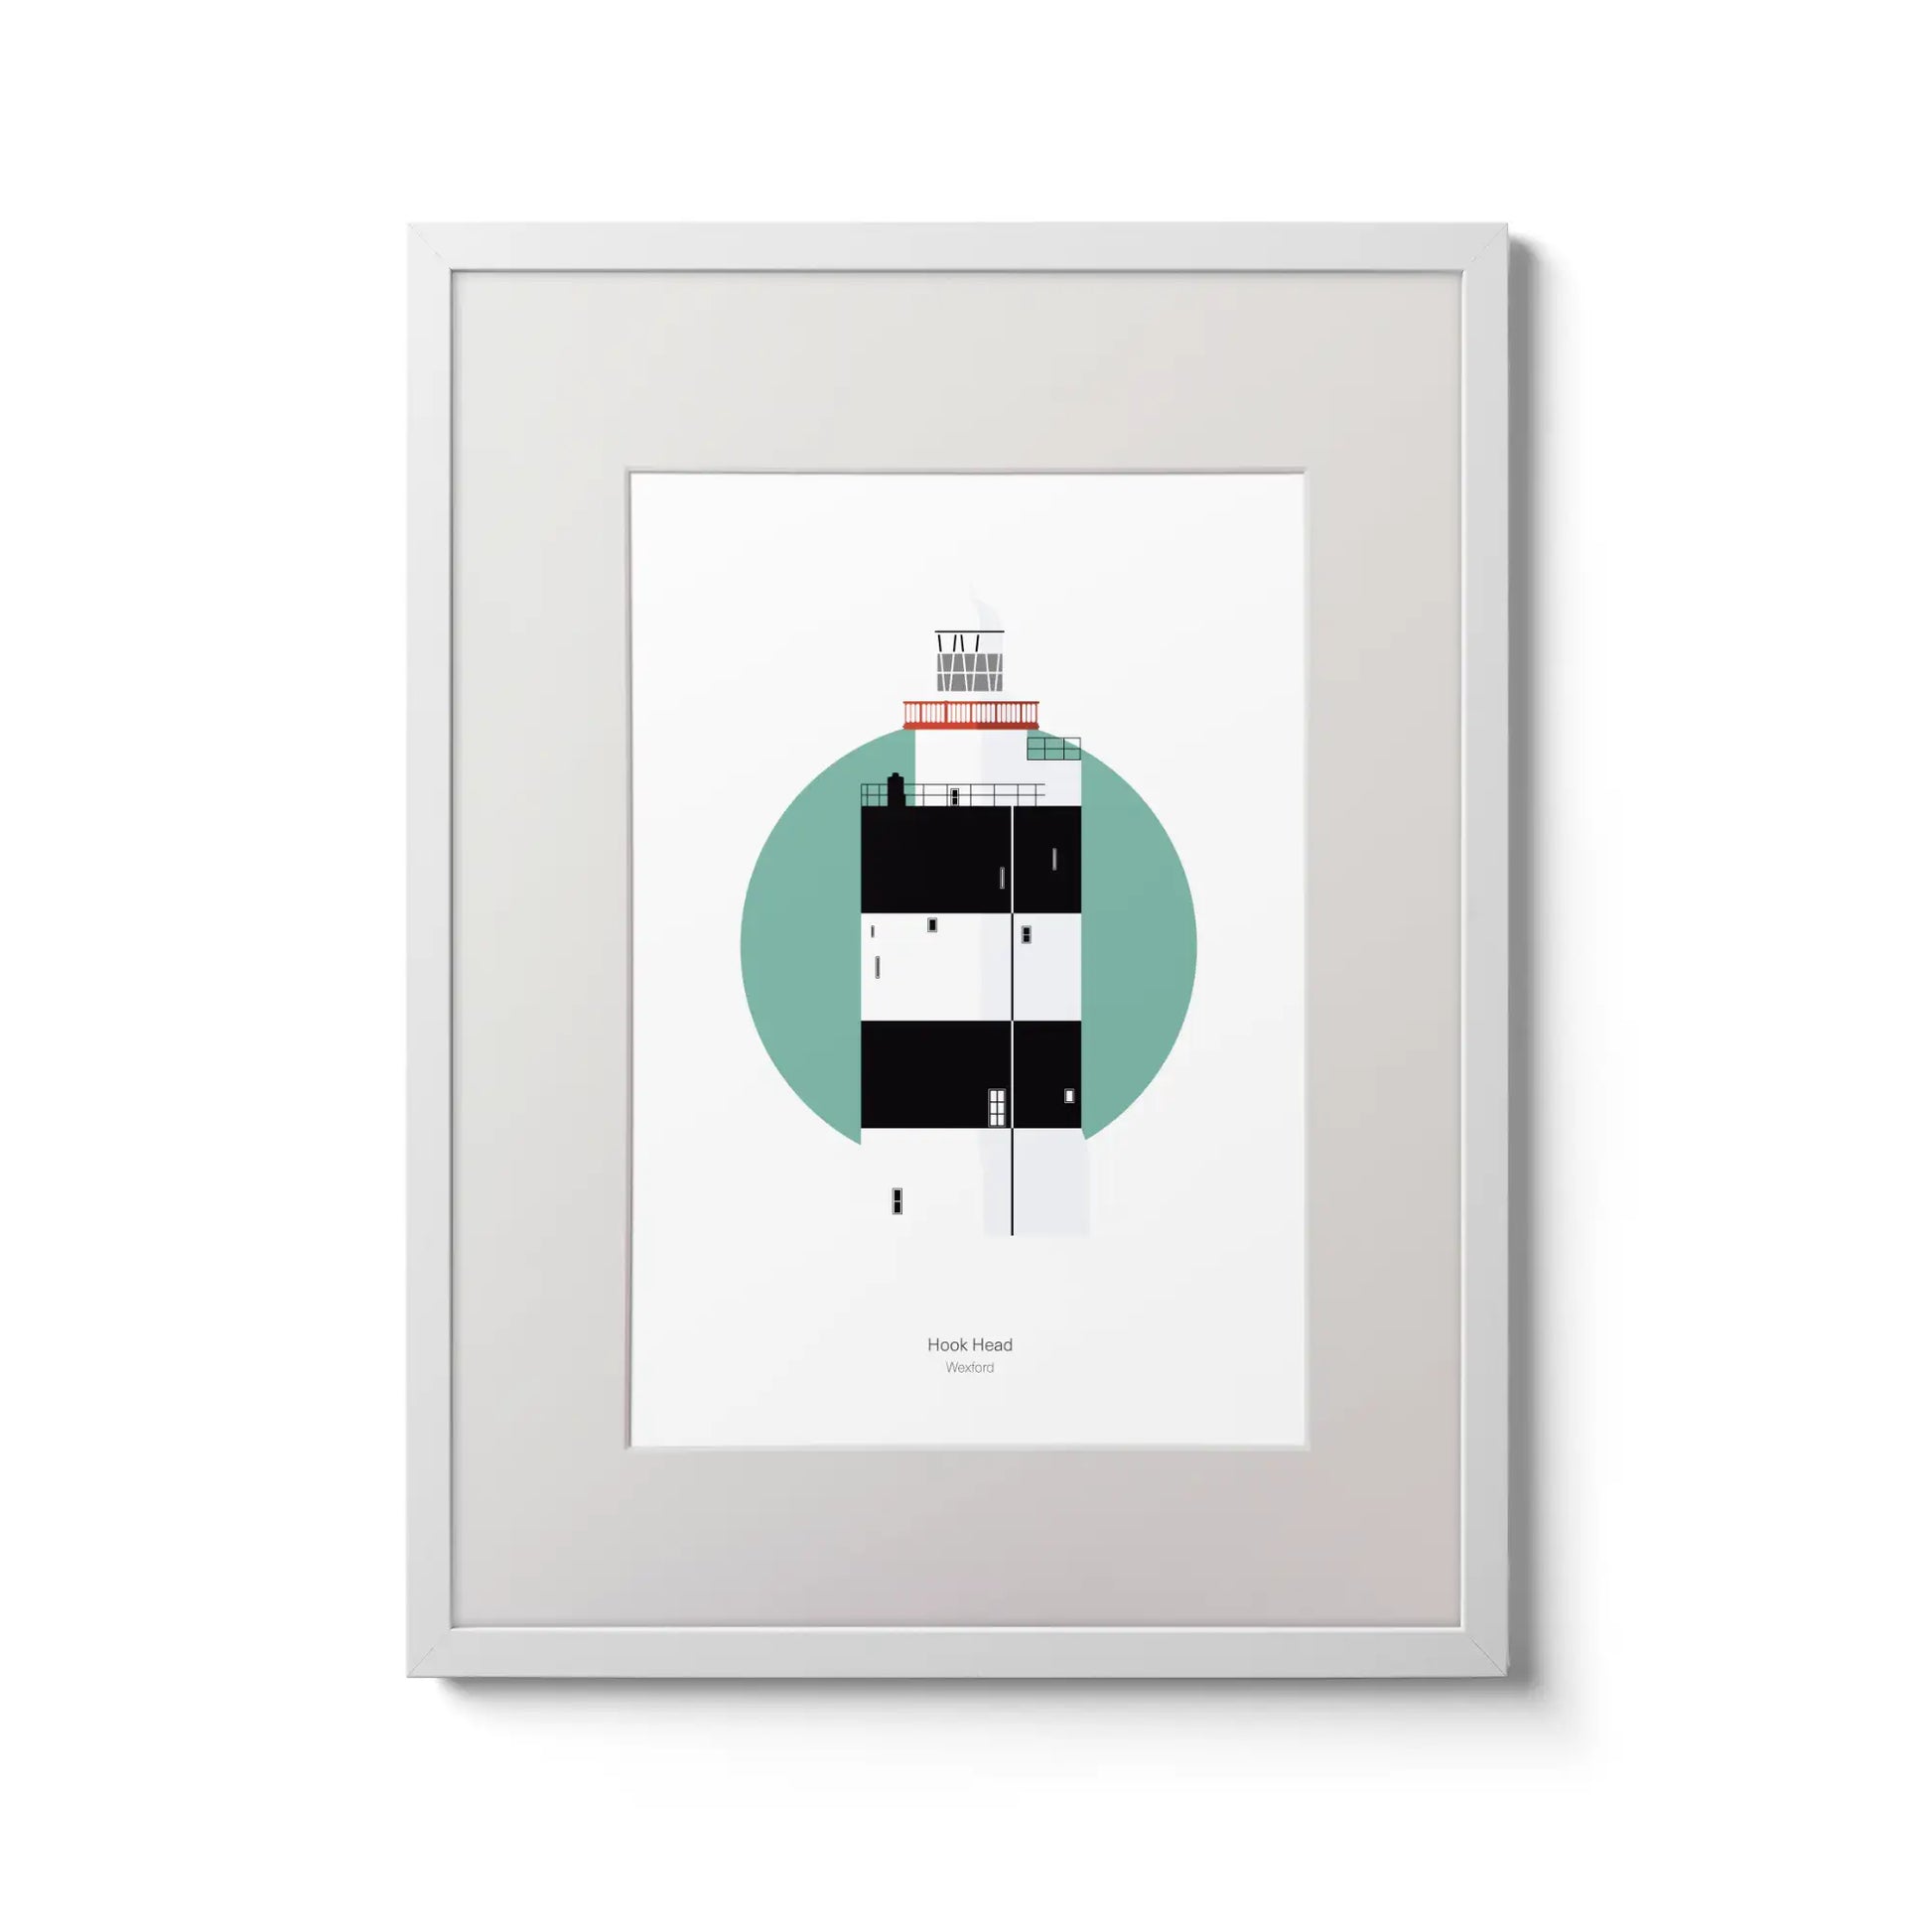 Illustration of Hook Head lighthouse on a white background inside light blue square,  in a white frame measuring 30x40cm.